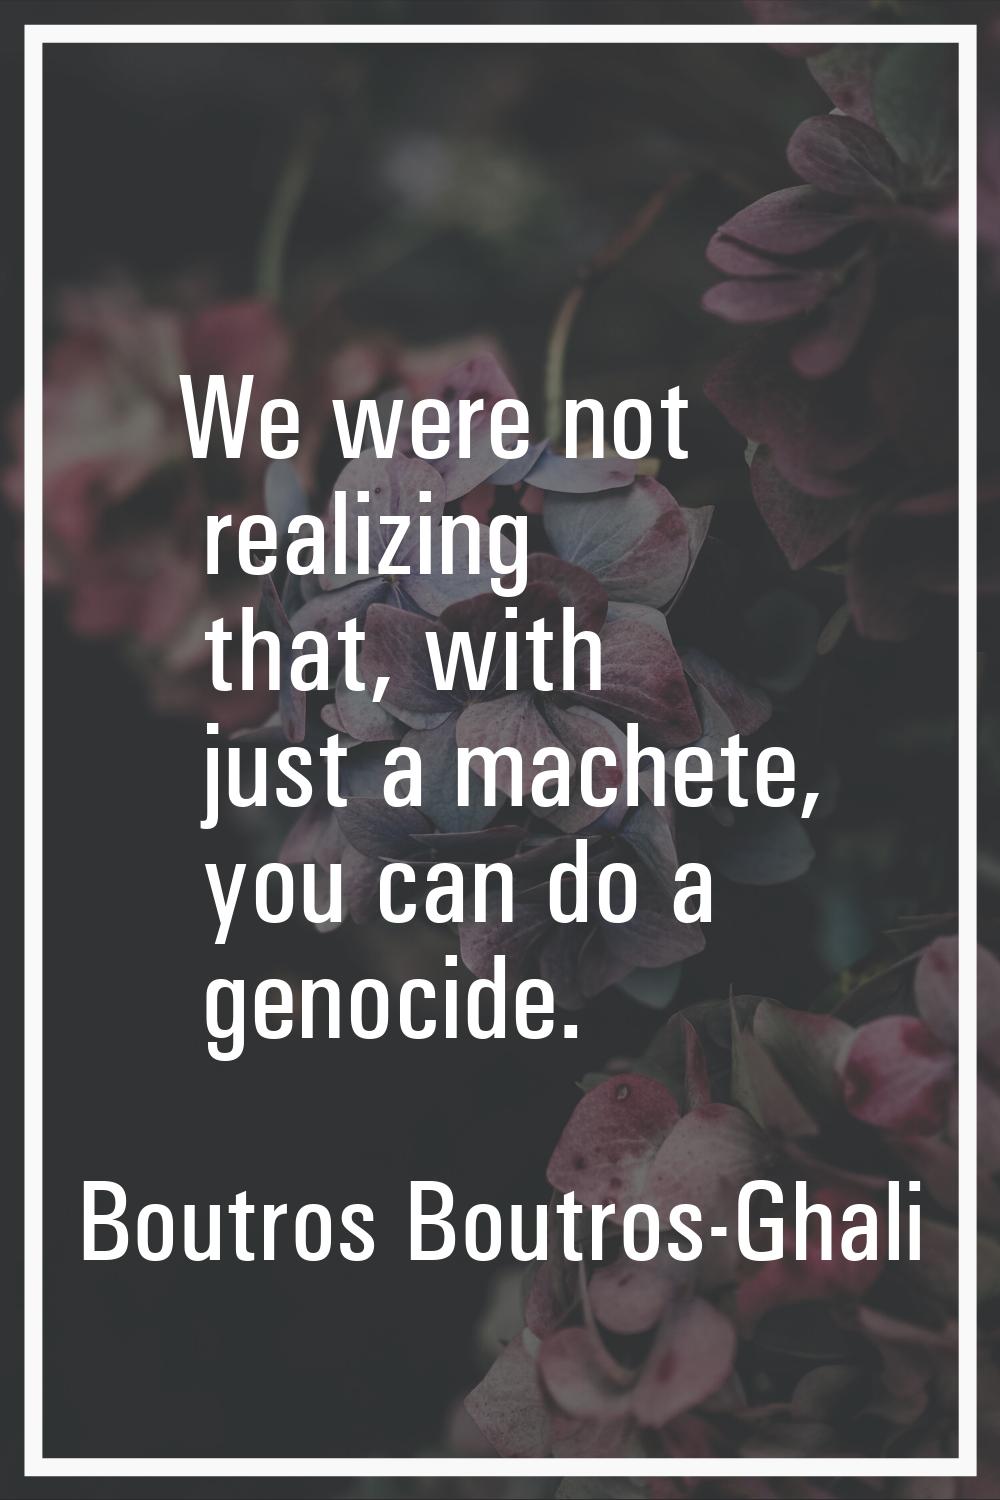 We were not realizing that, with just a machete, you can do a genocide.